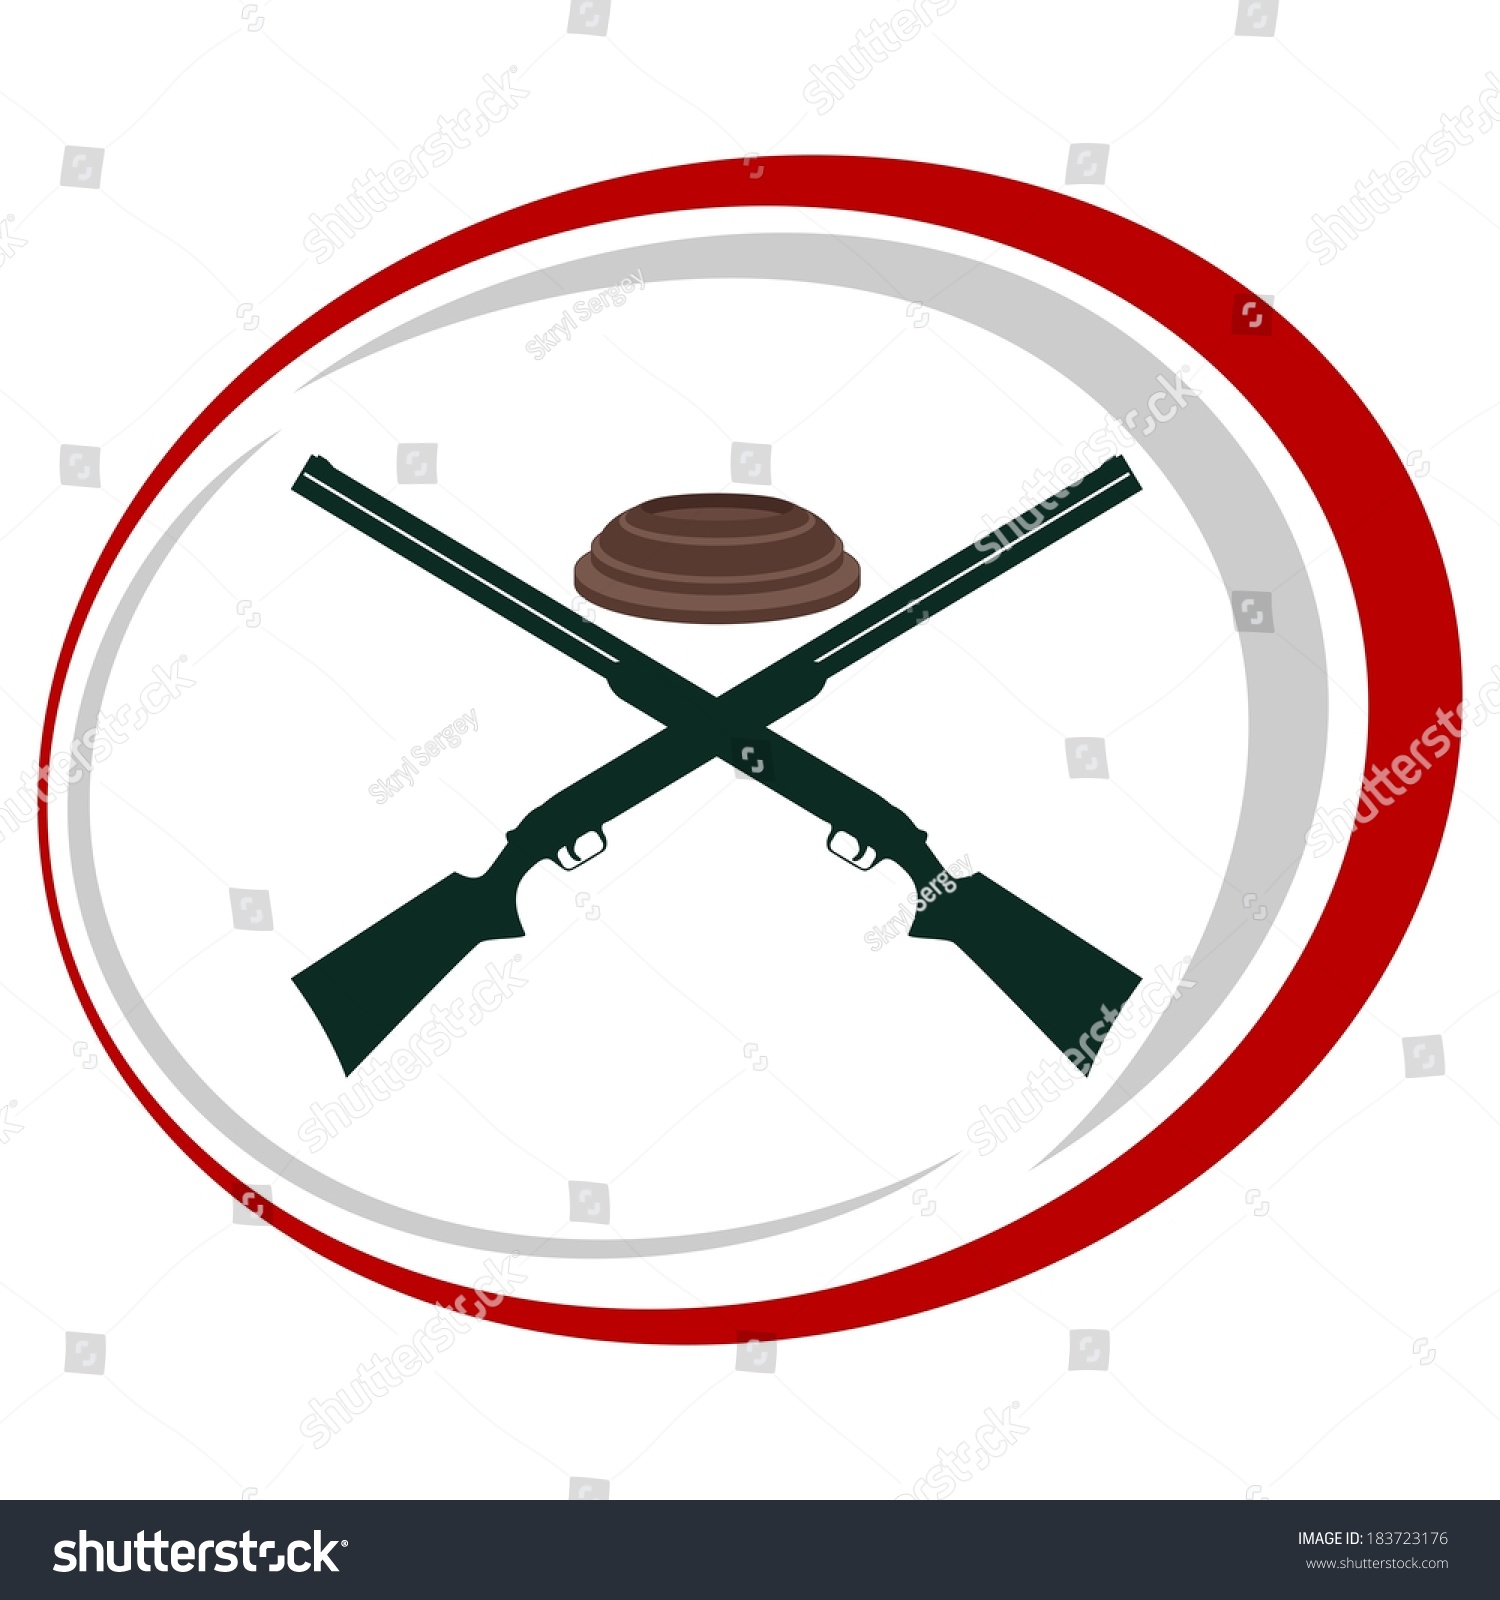 clay target clipart - photo #23